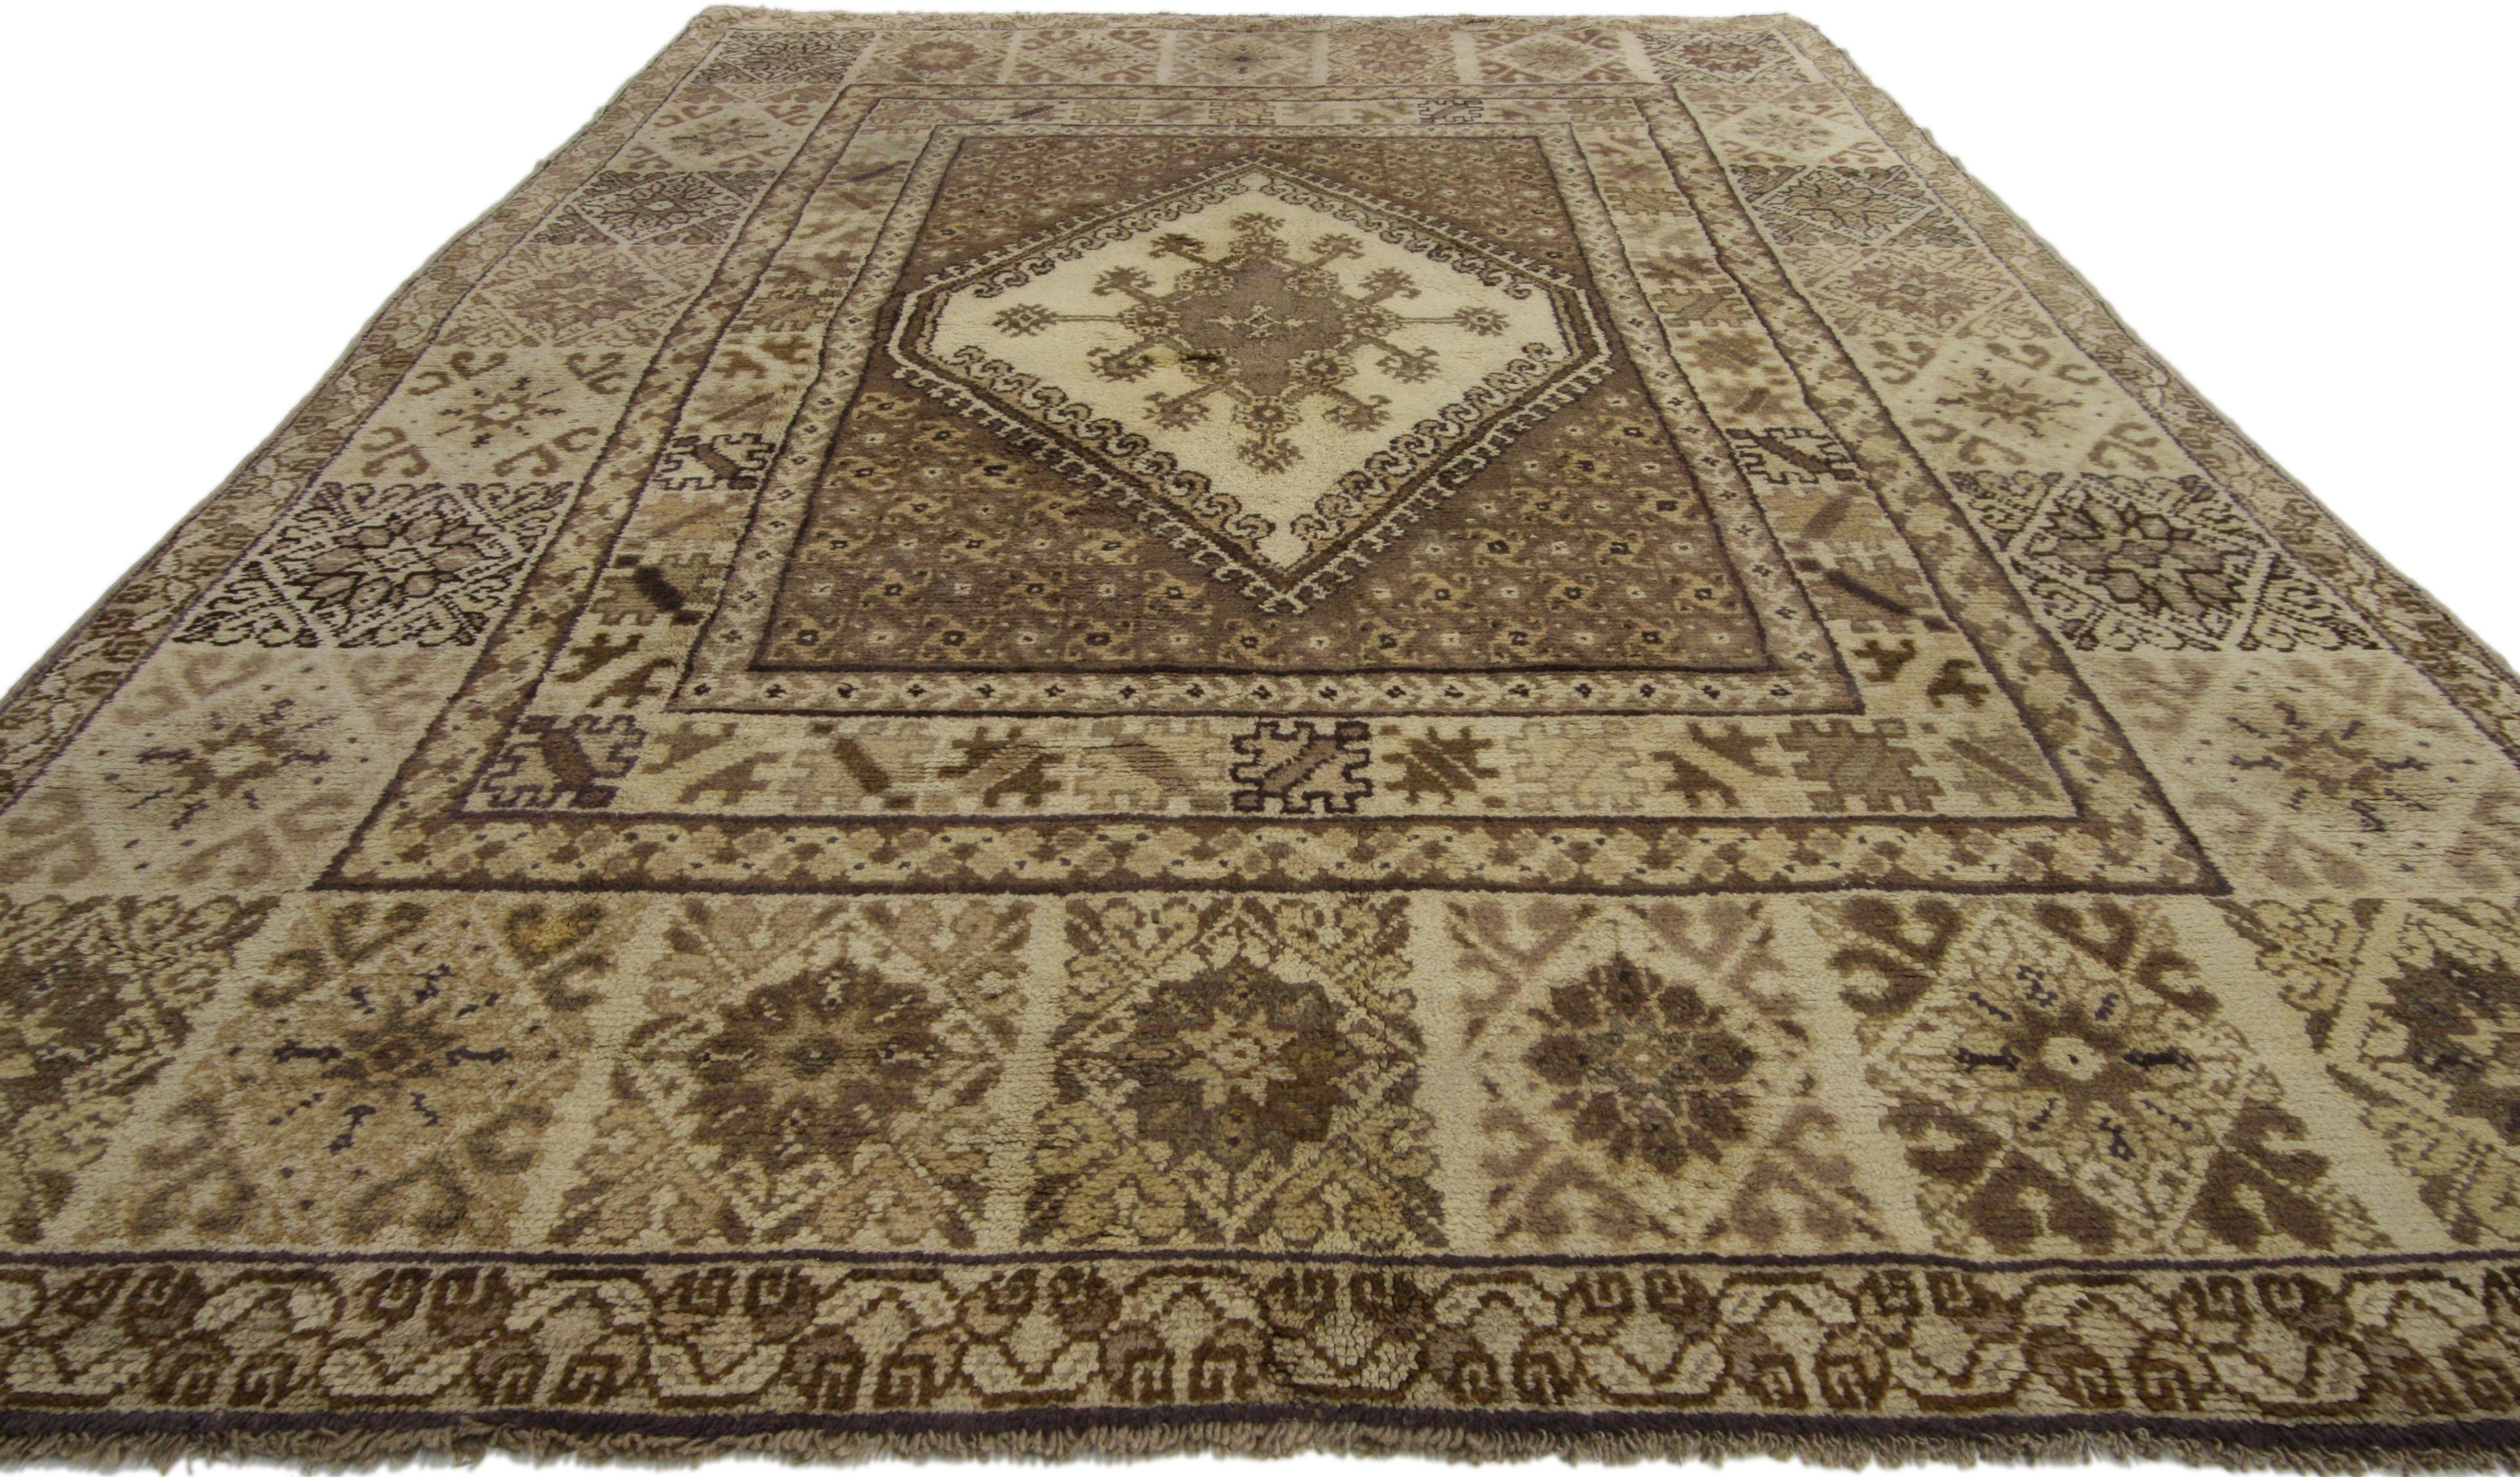 Hand-Knotted Vintage Berber Rabat Moroccan Rug with Neutral Earth-Tone Colors For Sale